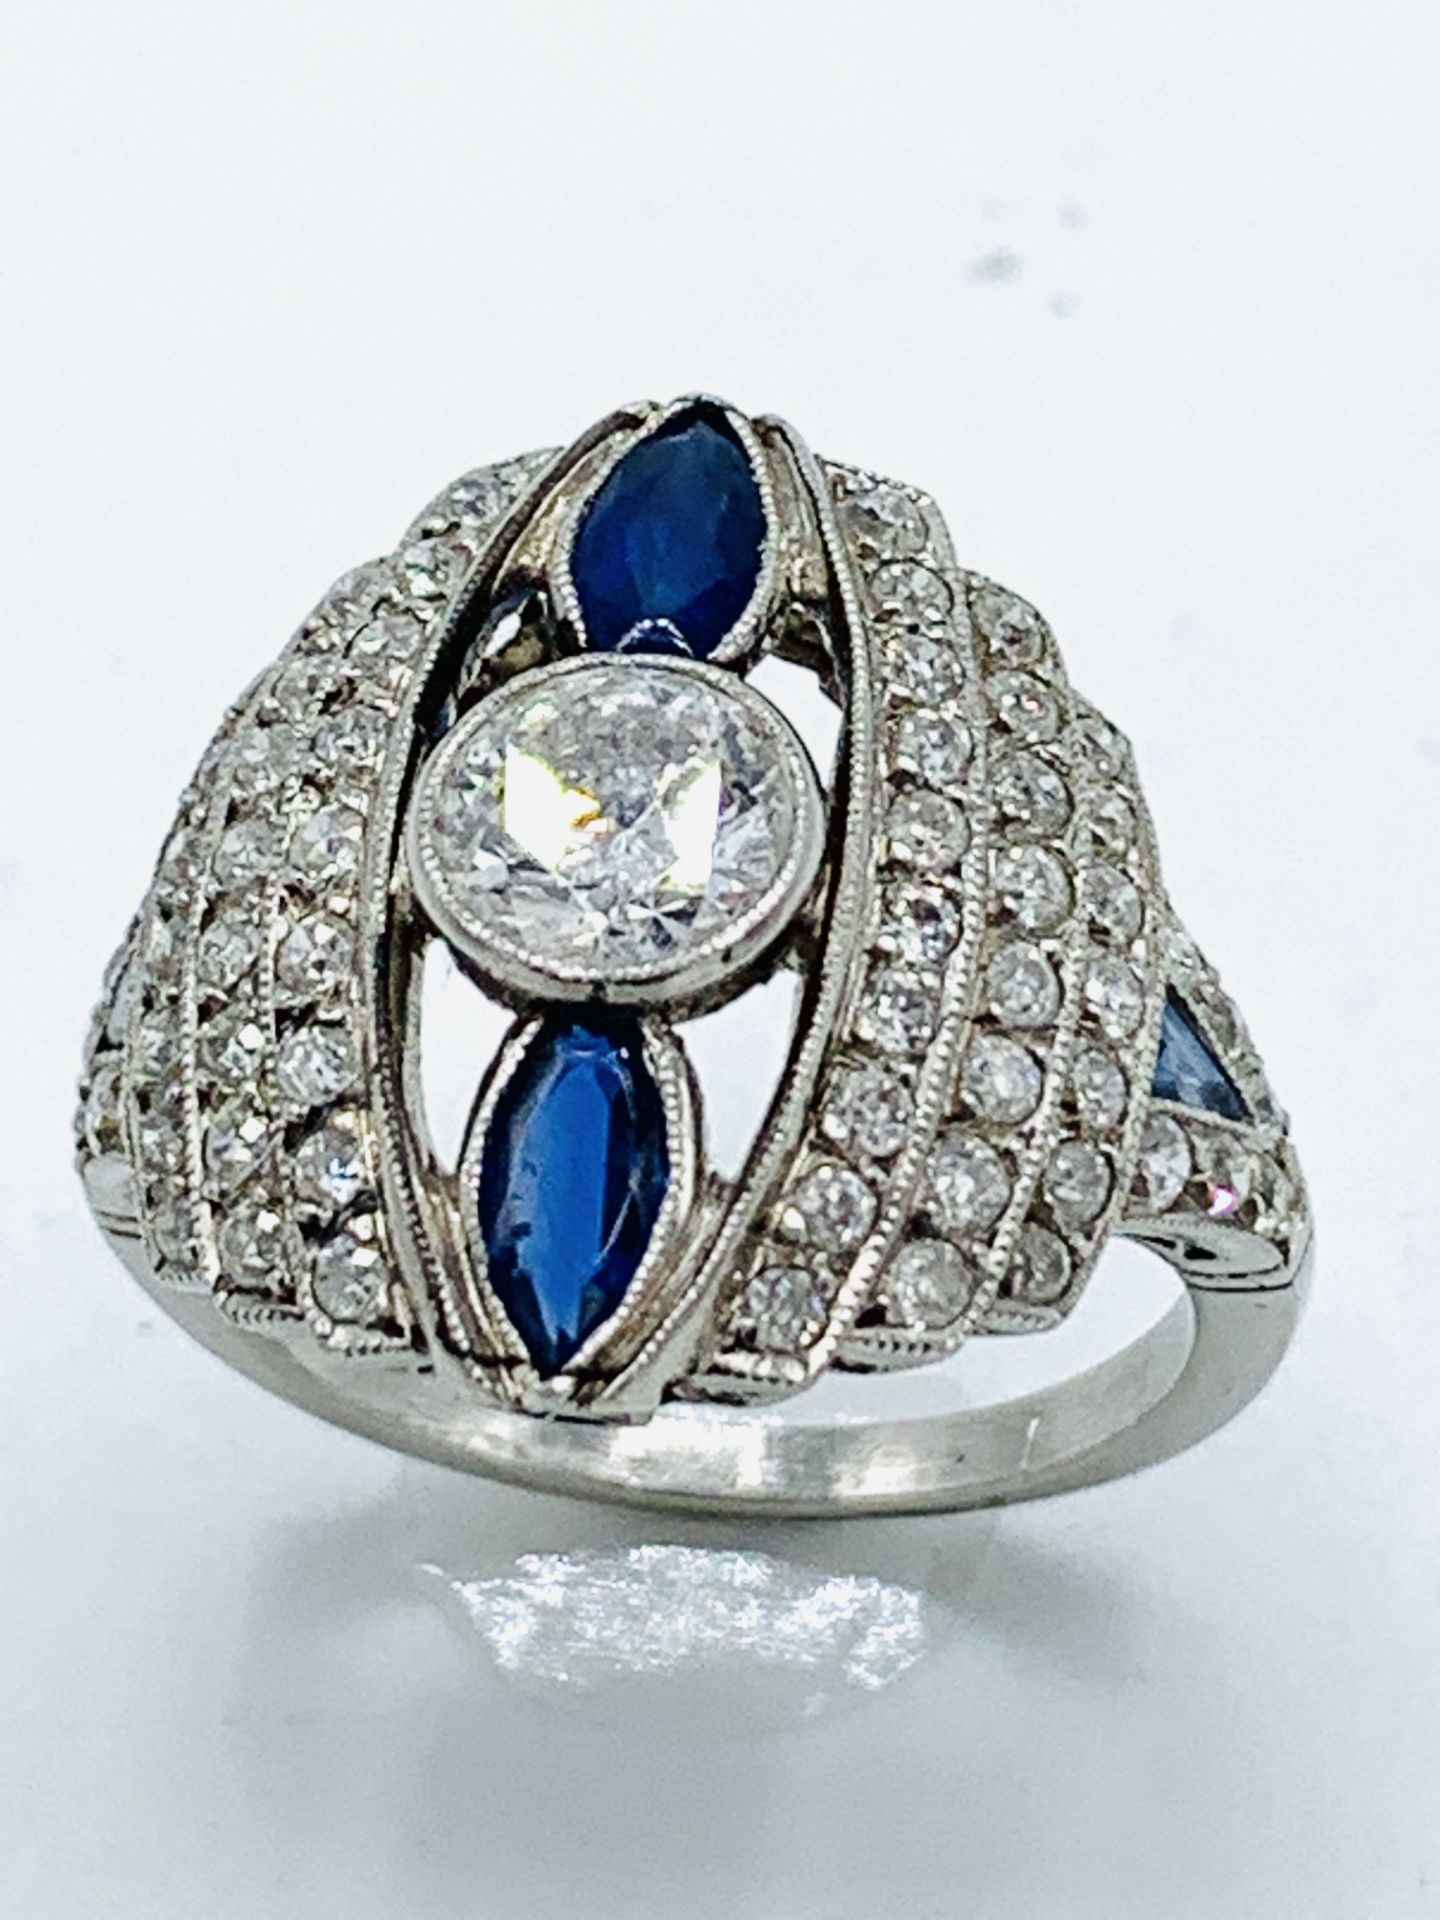 Art Deco white gold diamond and sapphire ring. Size O 1/2 Wt. 7.8gms. Size of centre diamond 6.3m